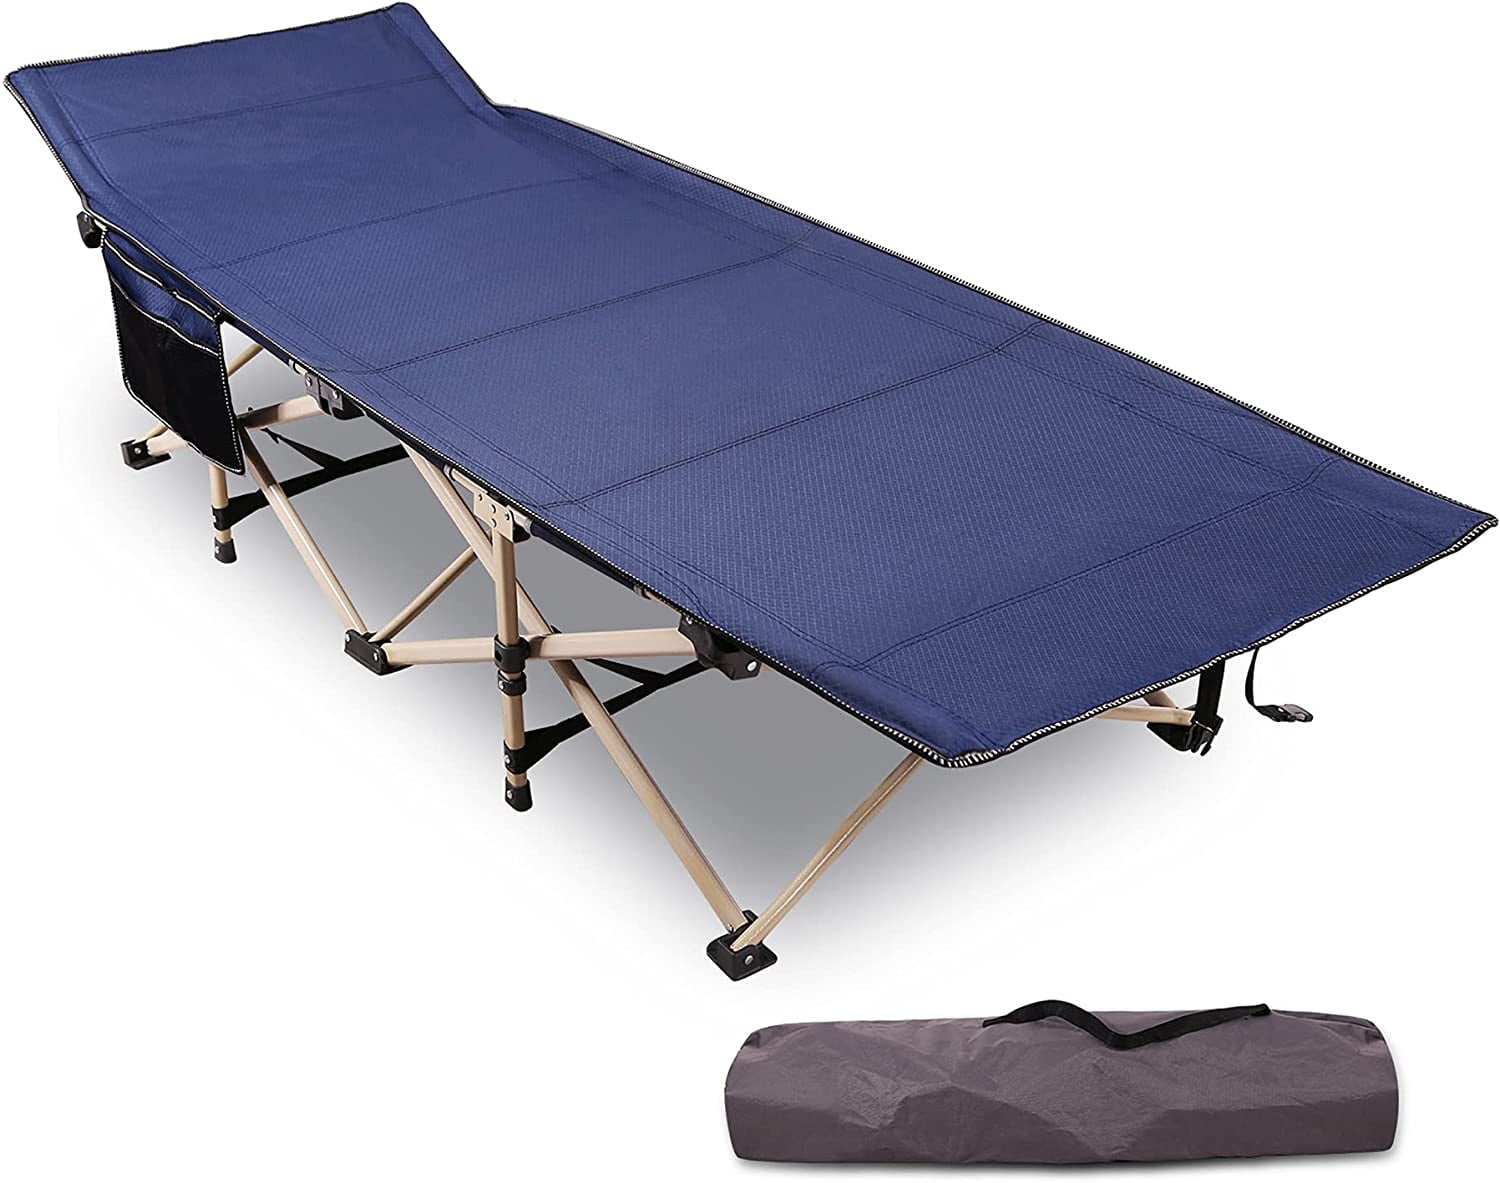 Outsunny Portable Camping Cot Tent with Air Mattress, Sleeping Bag 